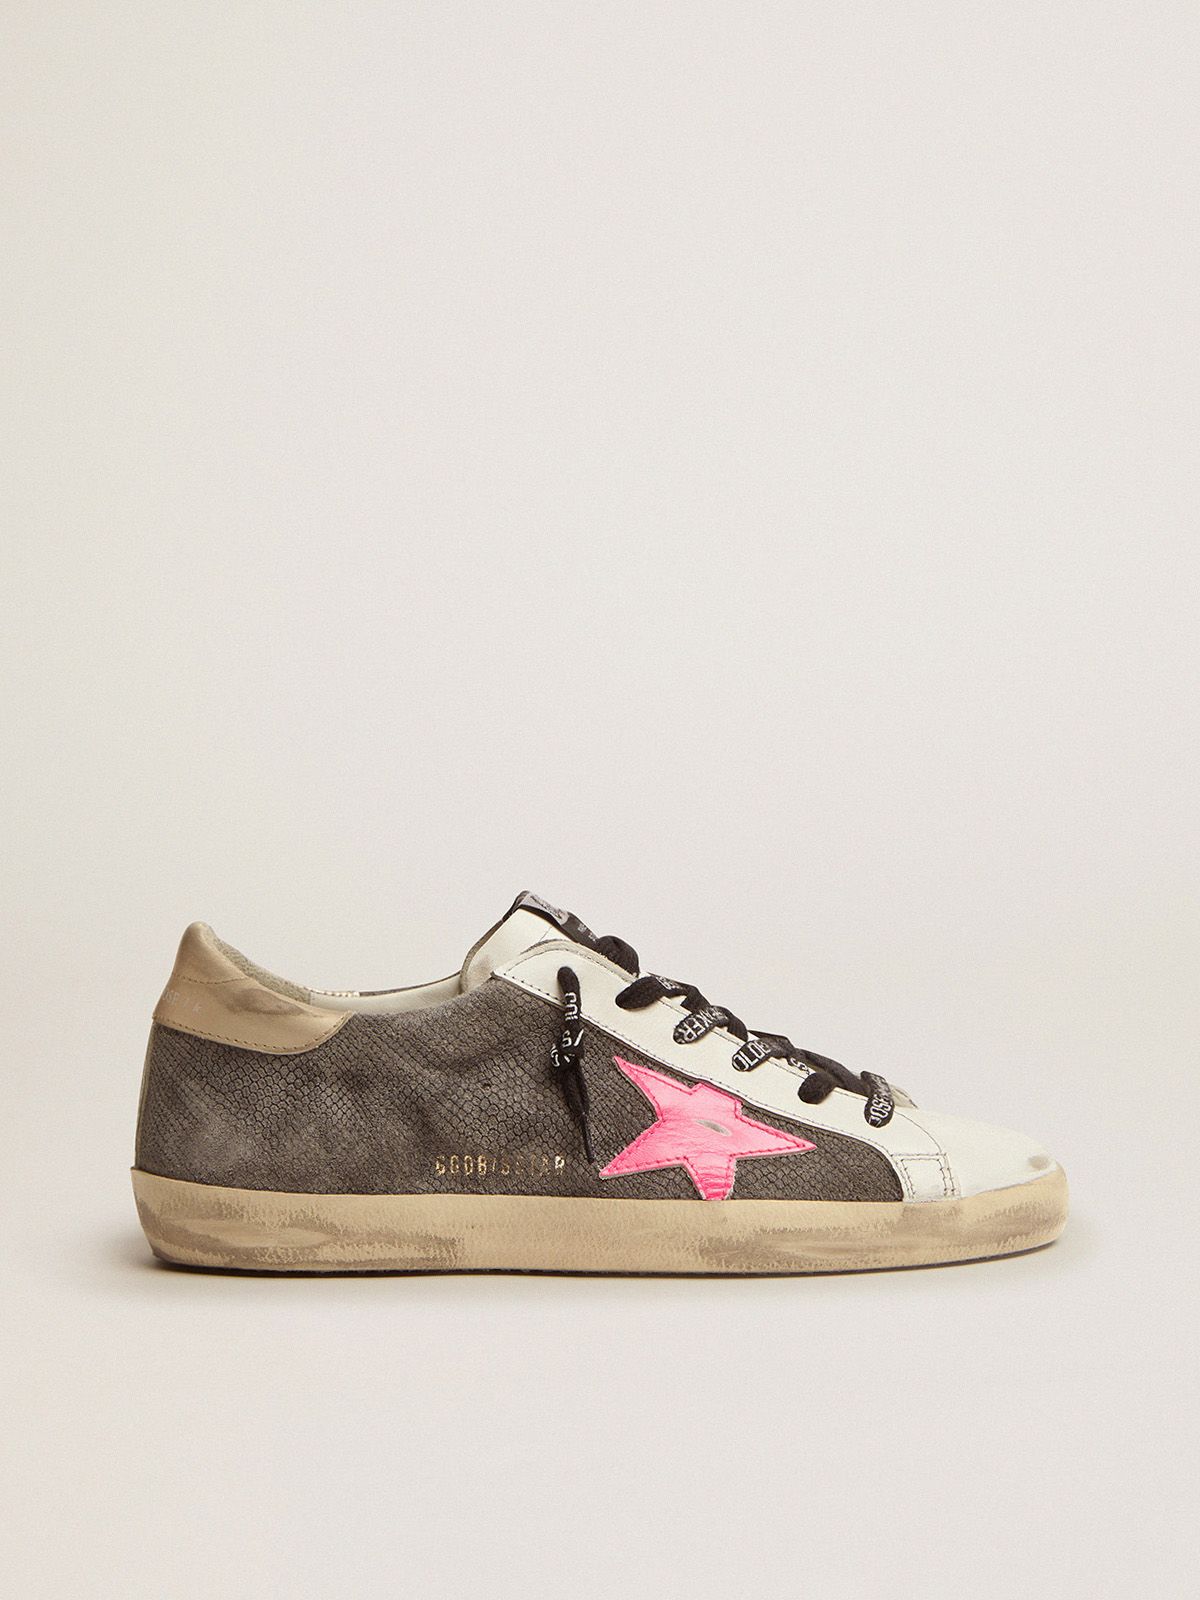 Sneakers Uomo Golden Goose Super-Star LTD sneakers with snake-print suede upper and gold laminated leather heel tab